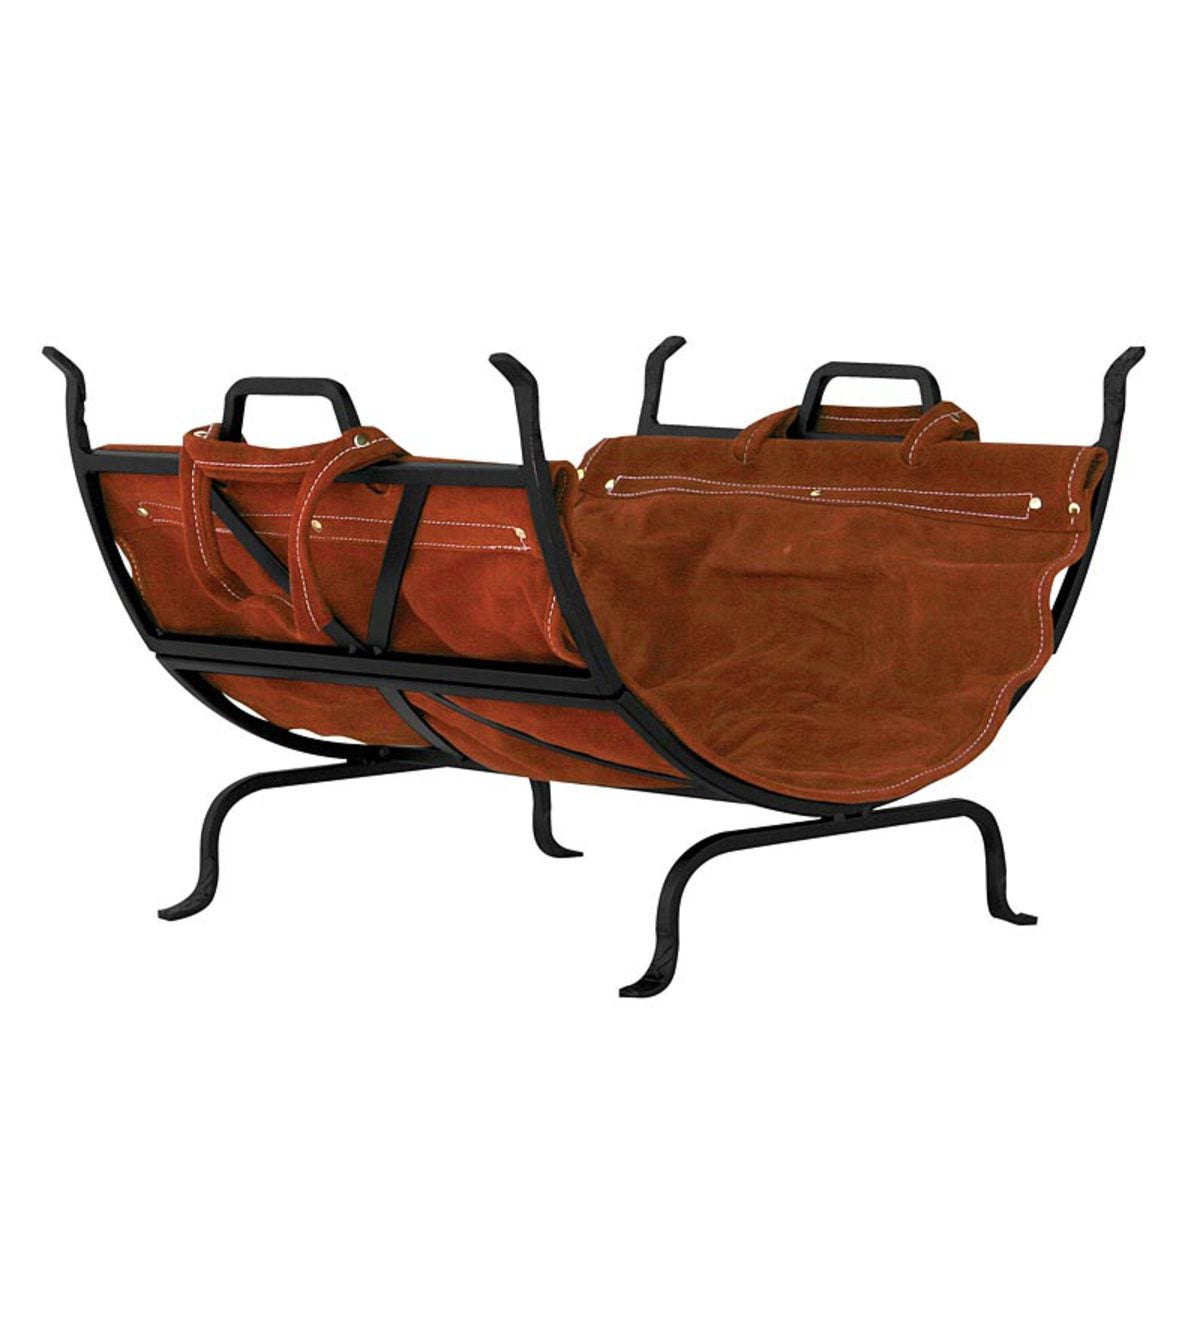 Black Wrought Iron Log Holder With Leather Carrier